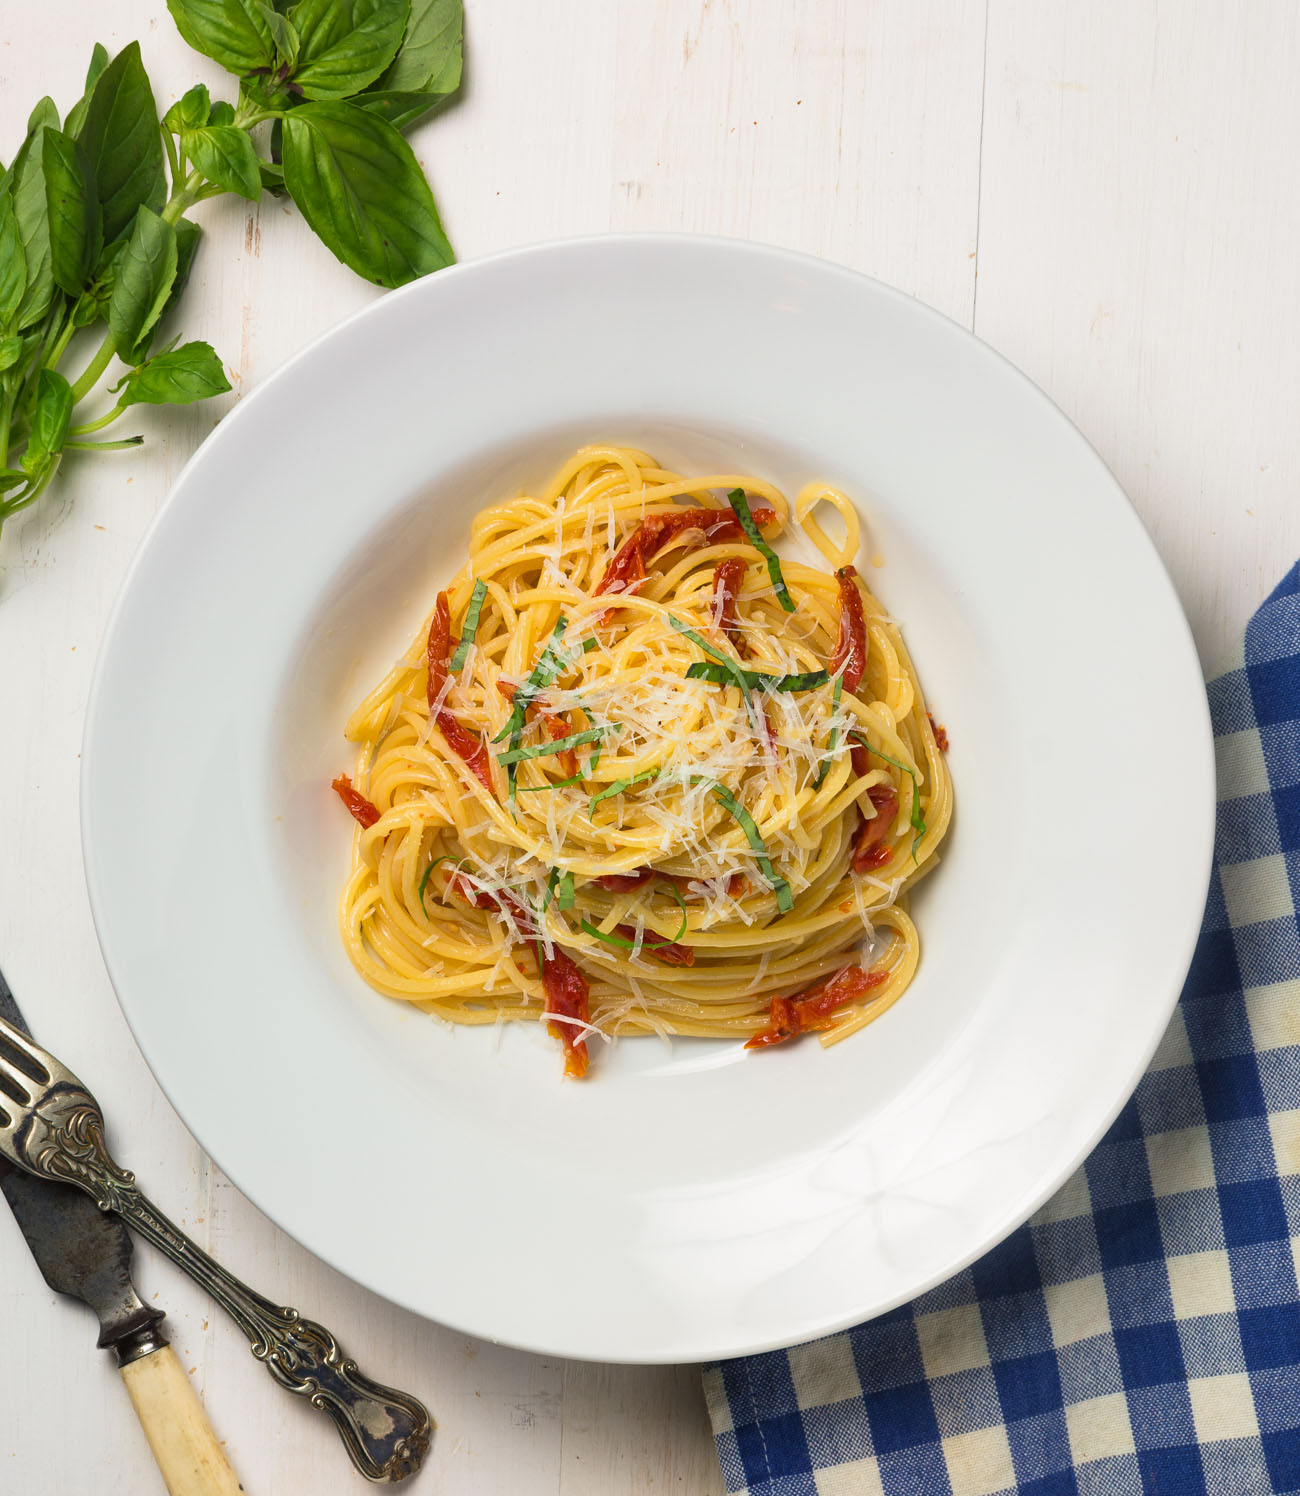 Spaghetti with sun-dried tomatoes and pecorino romano is a delicious weeknight meal.